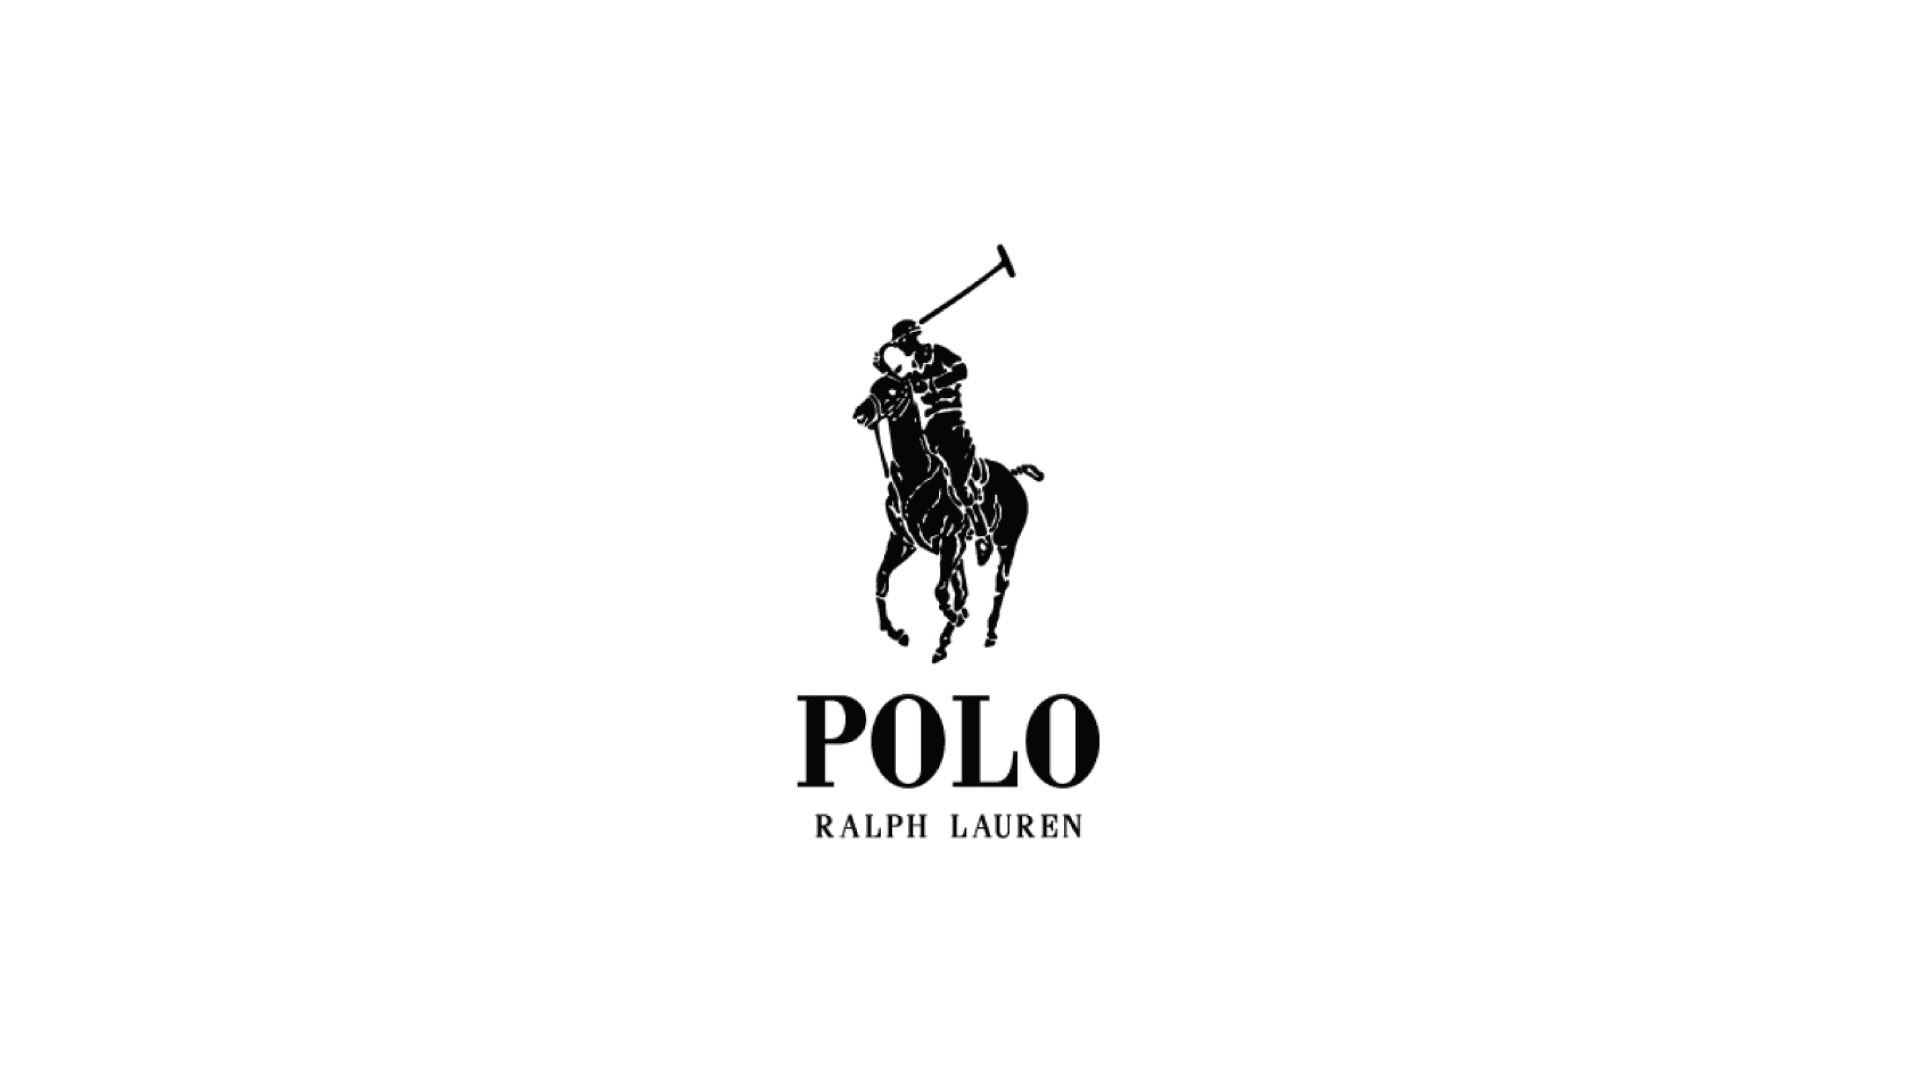 Polo Ralph Lauren works with CADS